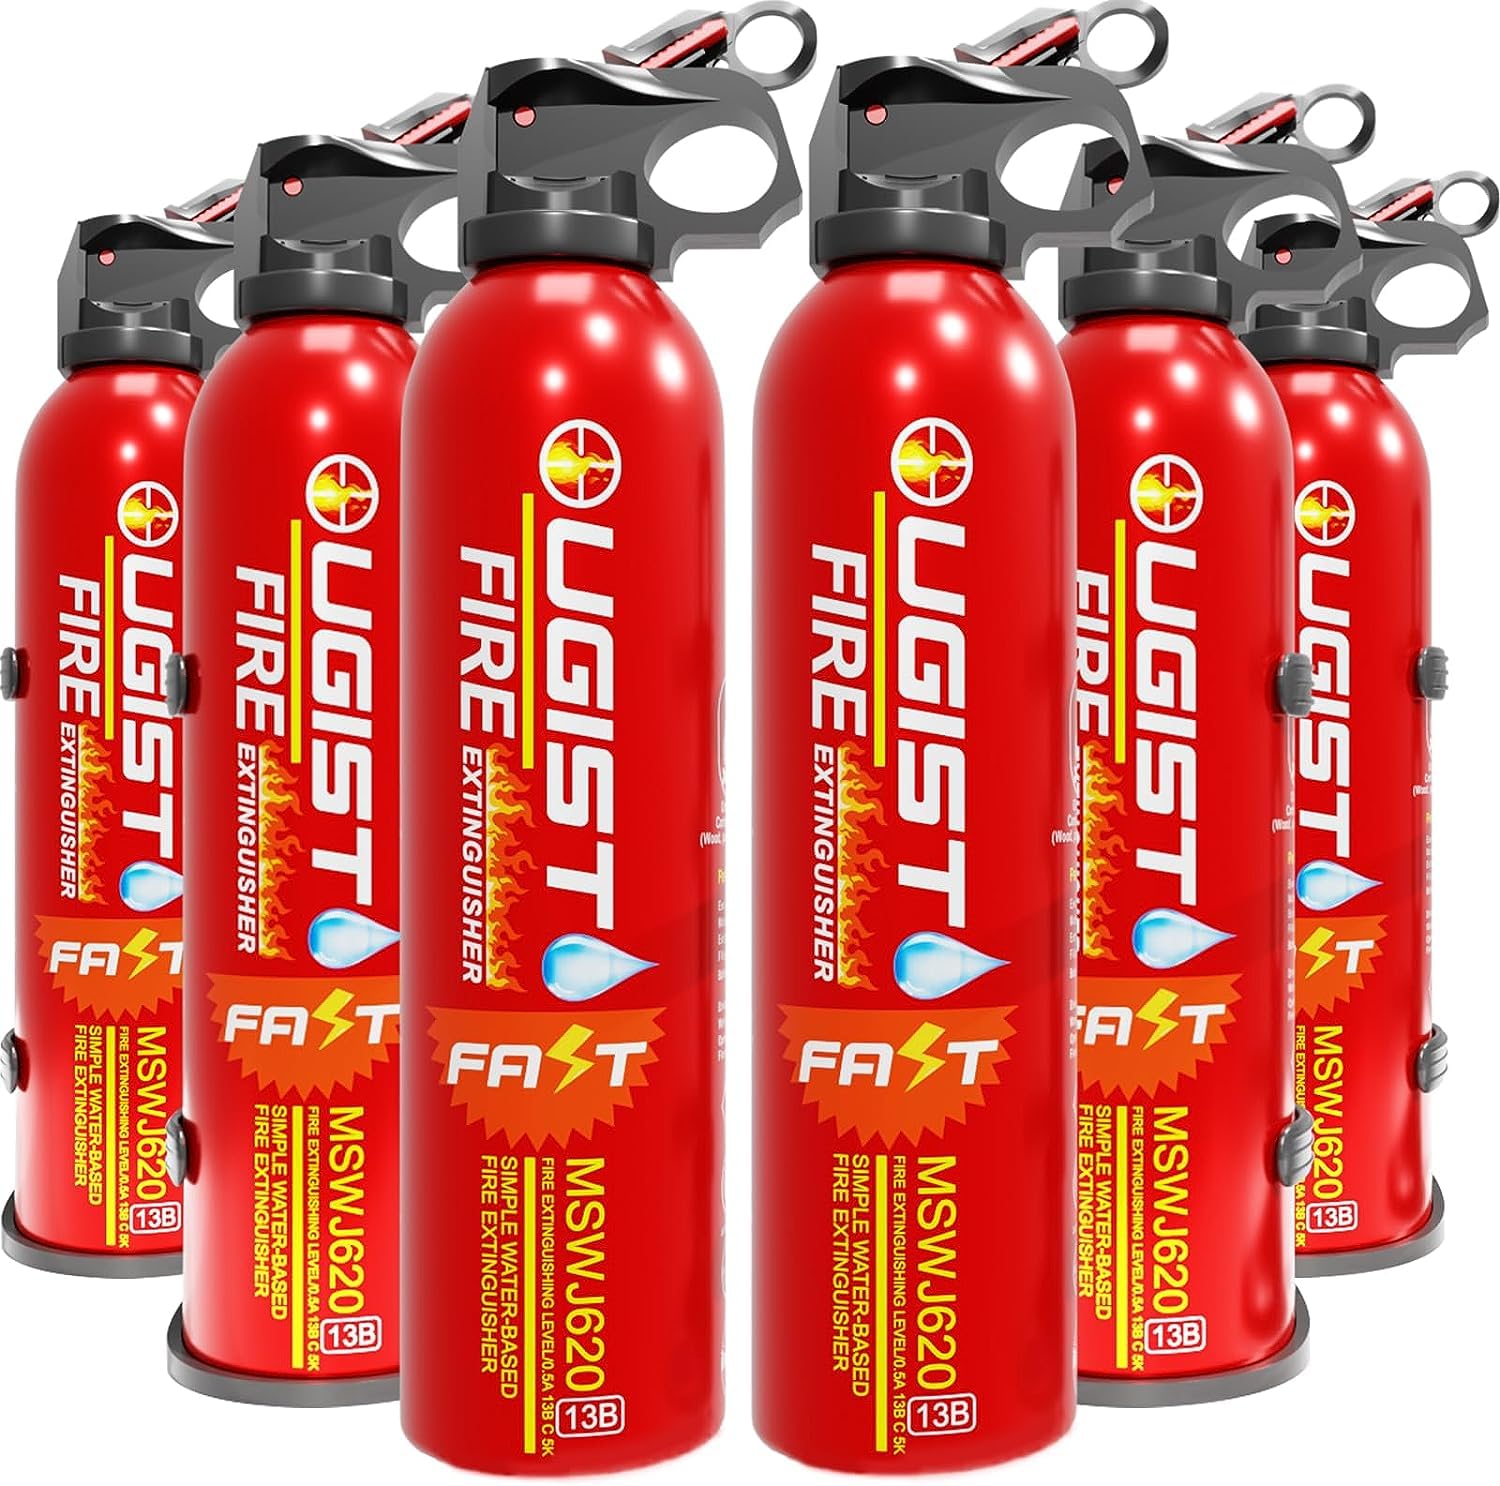 Ougist 6 Pcs Fire Extinguisher with Mount - 4 in-1 Fire Extinguishers for The Home/Car/Kitchen, A, B, C, K Category Portable Wat